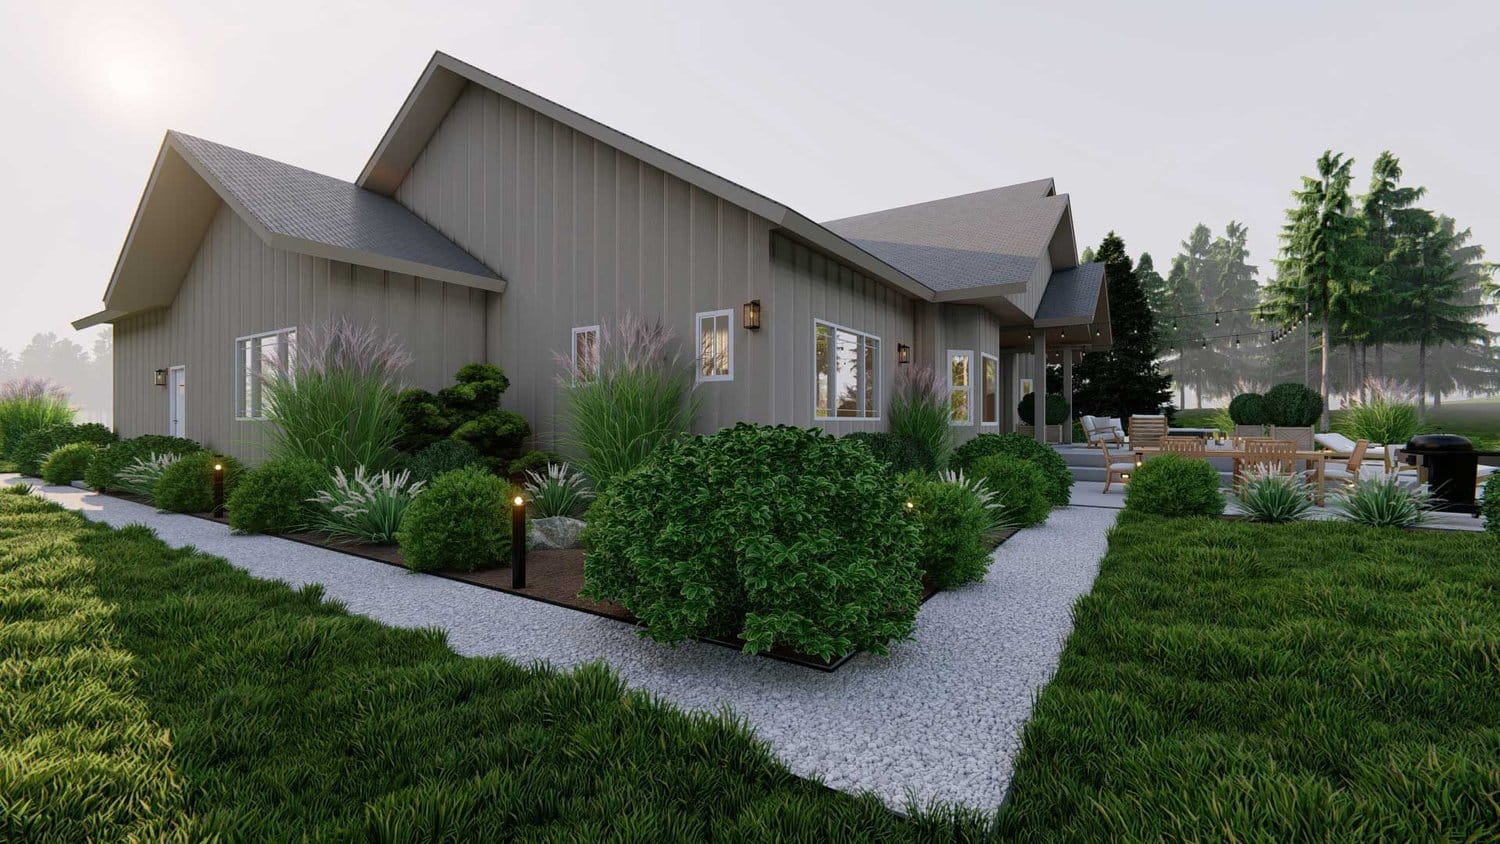 Twin Falls front yard view with grass alternative cover plantings, gravel paths, plants and seating area